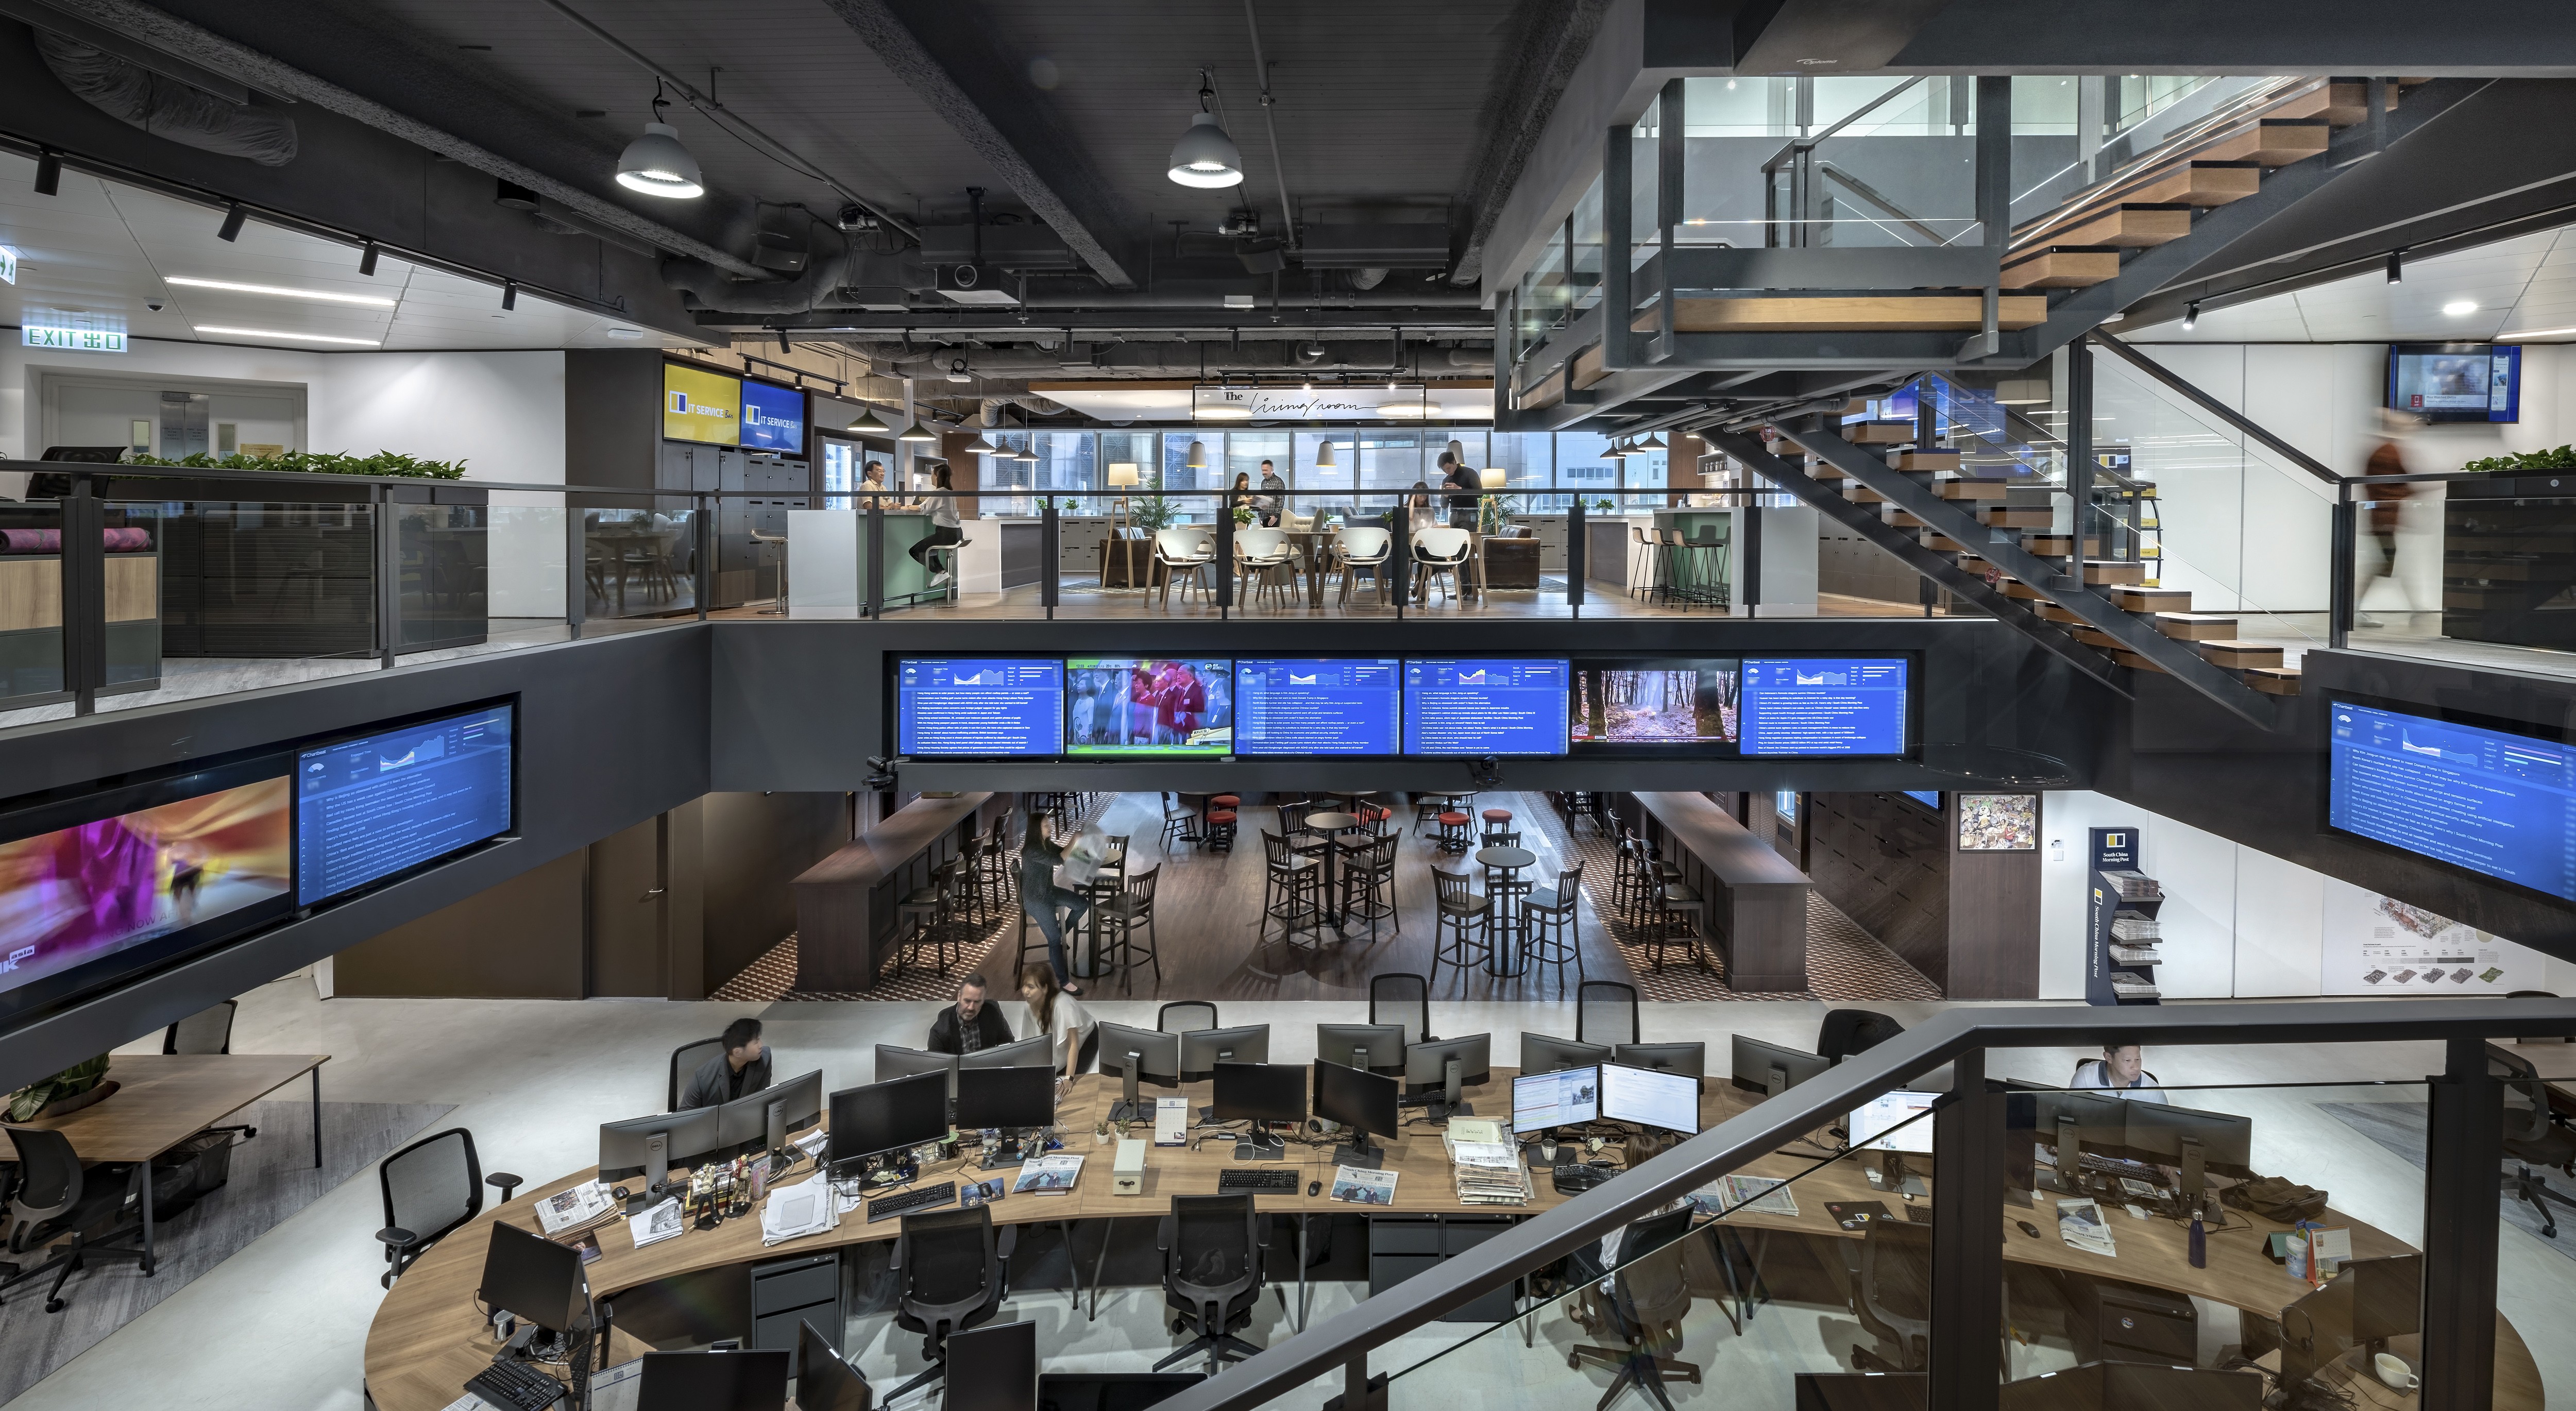 A view of the newsroom at the head office of the South China Morning Post, at Times Square in Causeway Bay, Hong Kong. Photo: SCMP